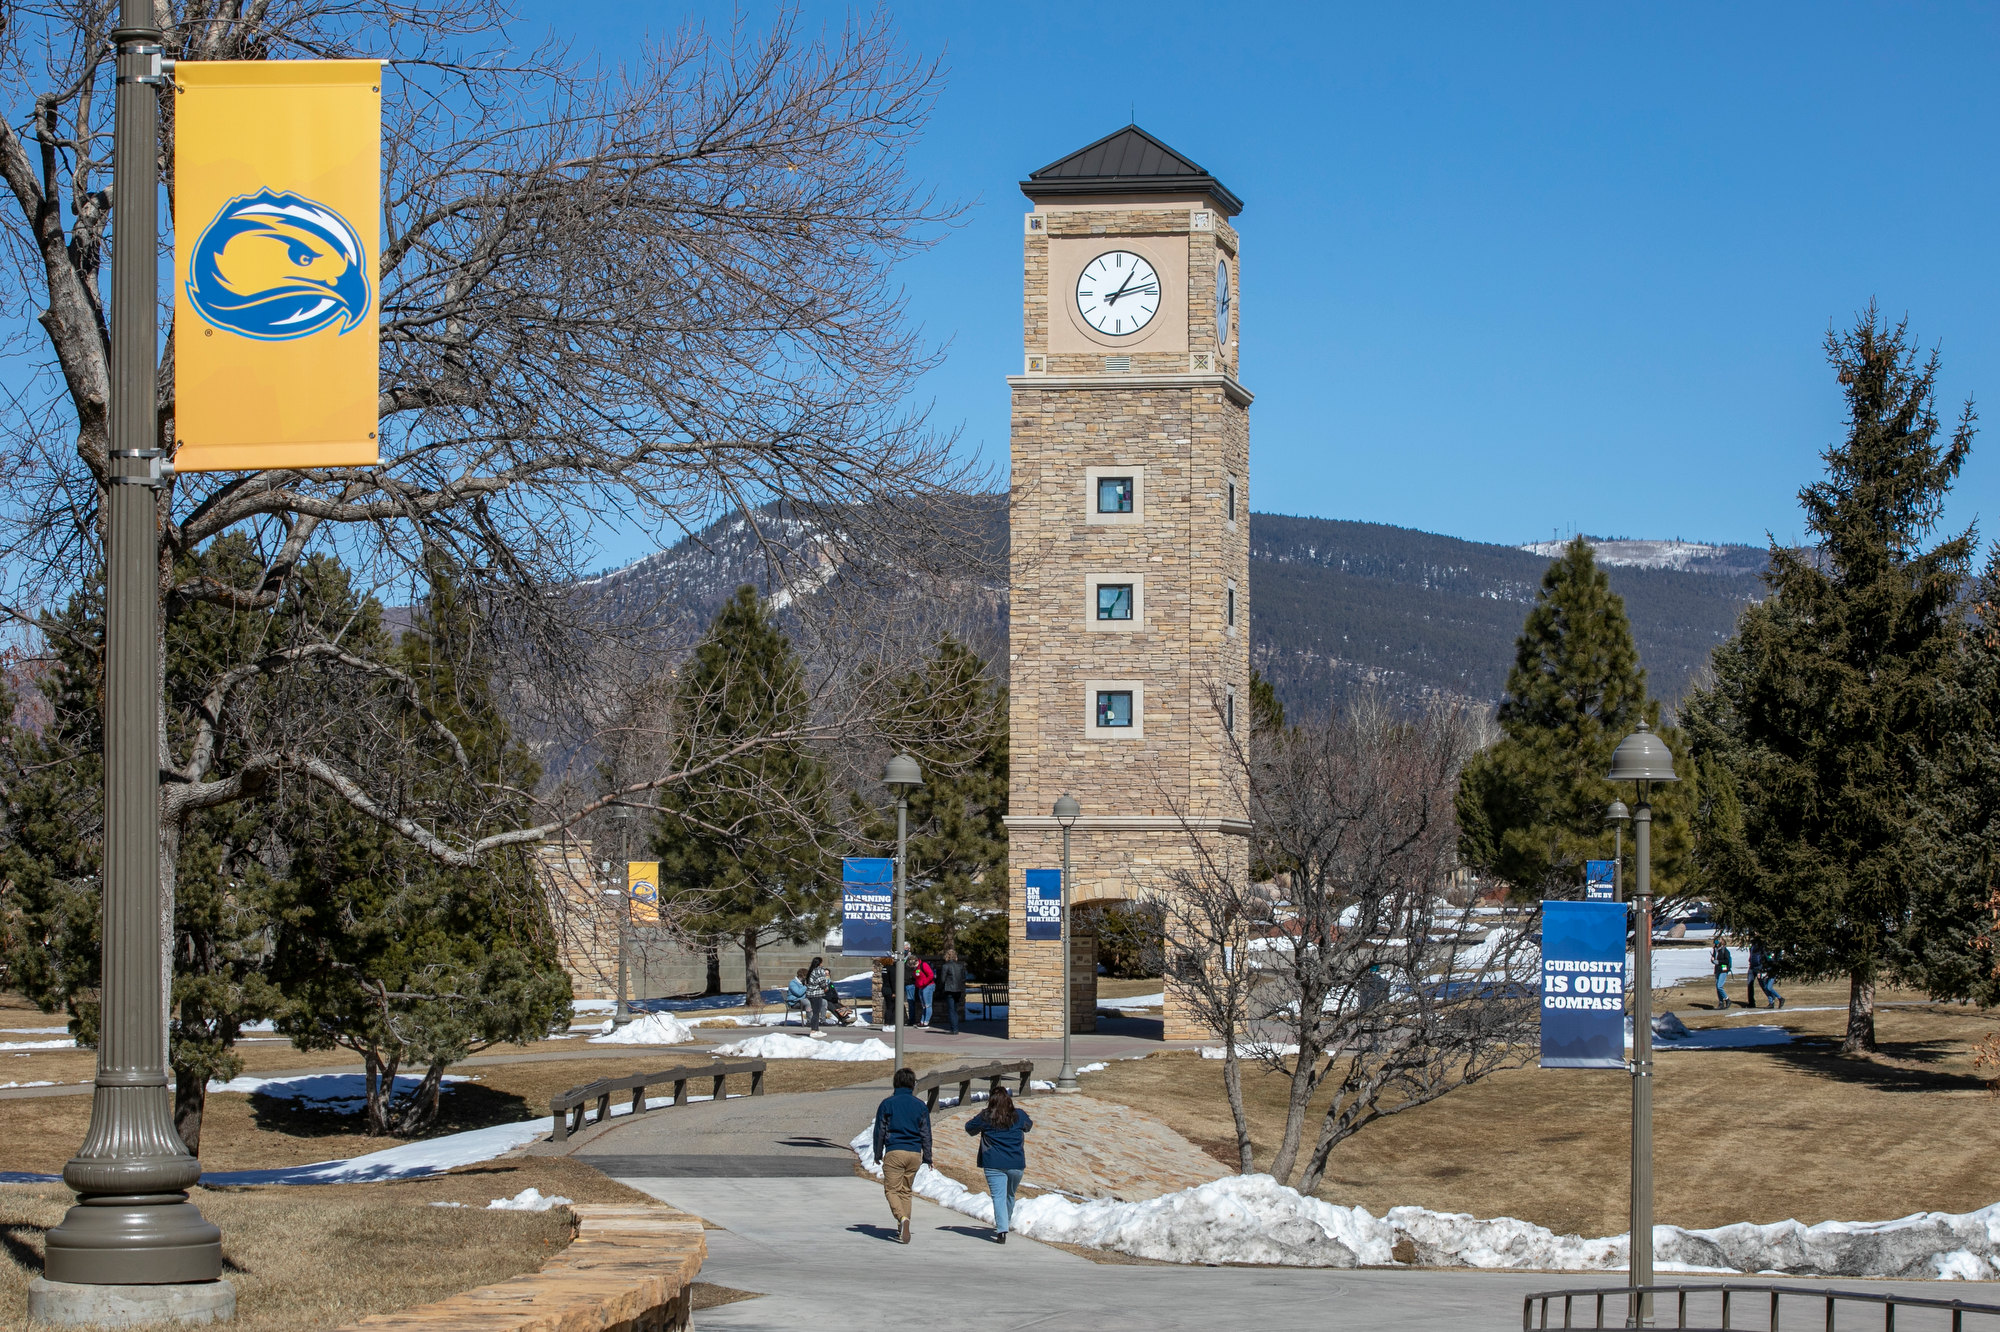   
																Nearly a third of students at this ski-town college have been homeless. Here’s how the school’s responding 
															 